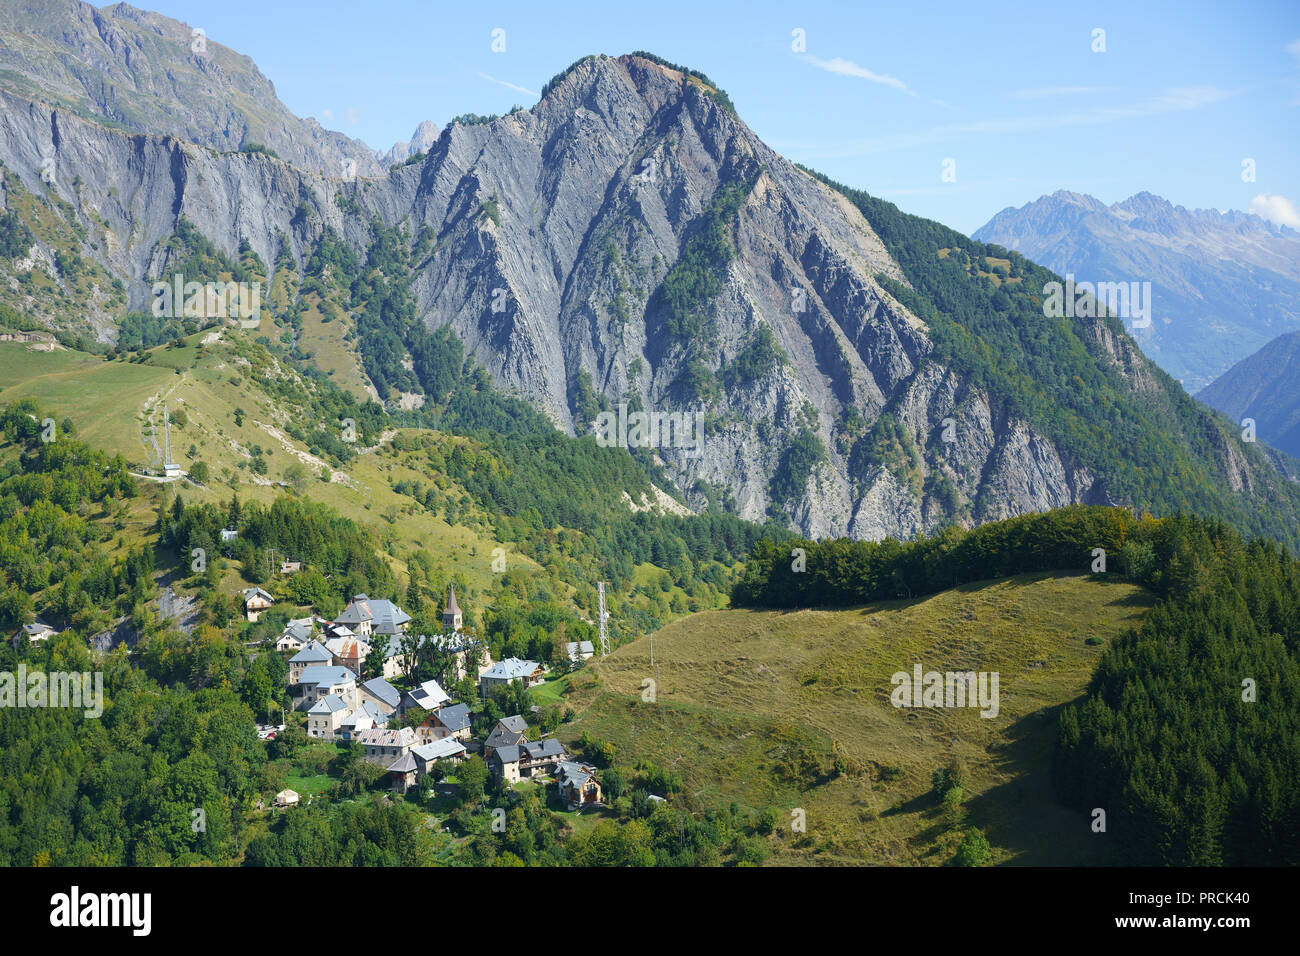 AERIAL VIEW. Small village with a rugged mountain landscape for background. Ornon, Isère, Auvergne-Rhône-Alpes, France. Stock Photo